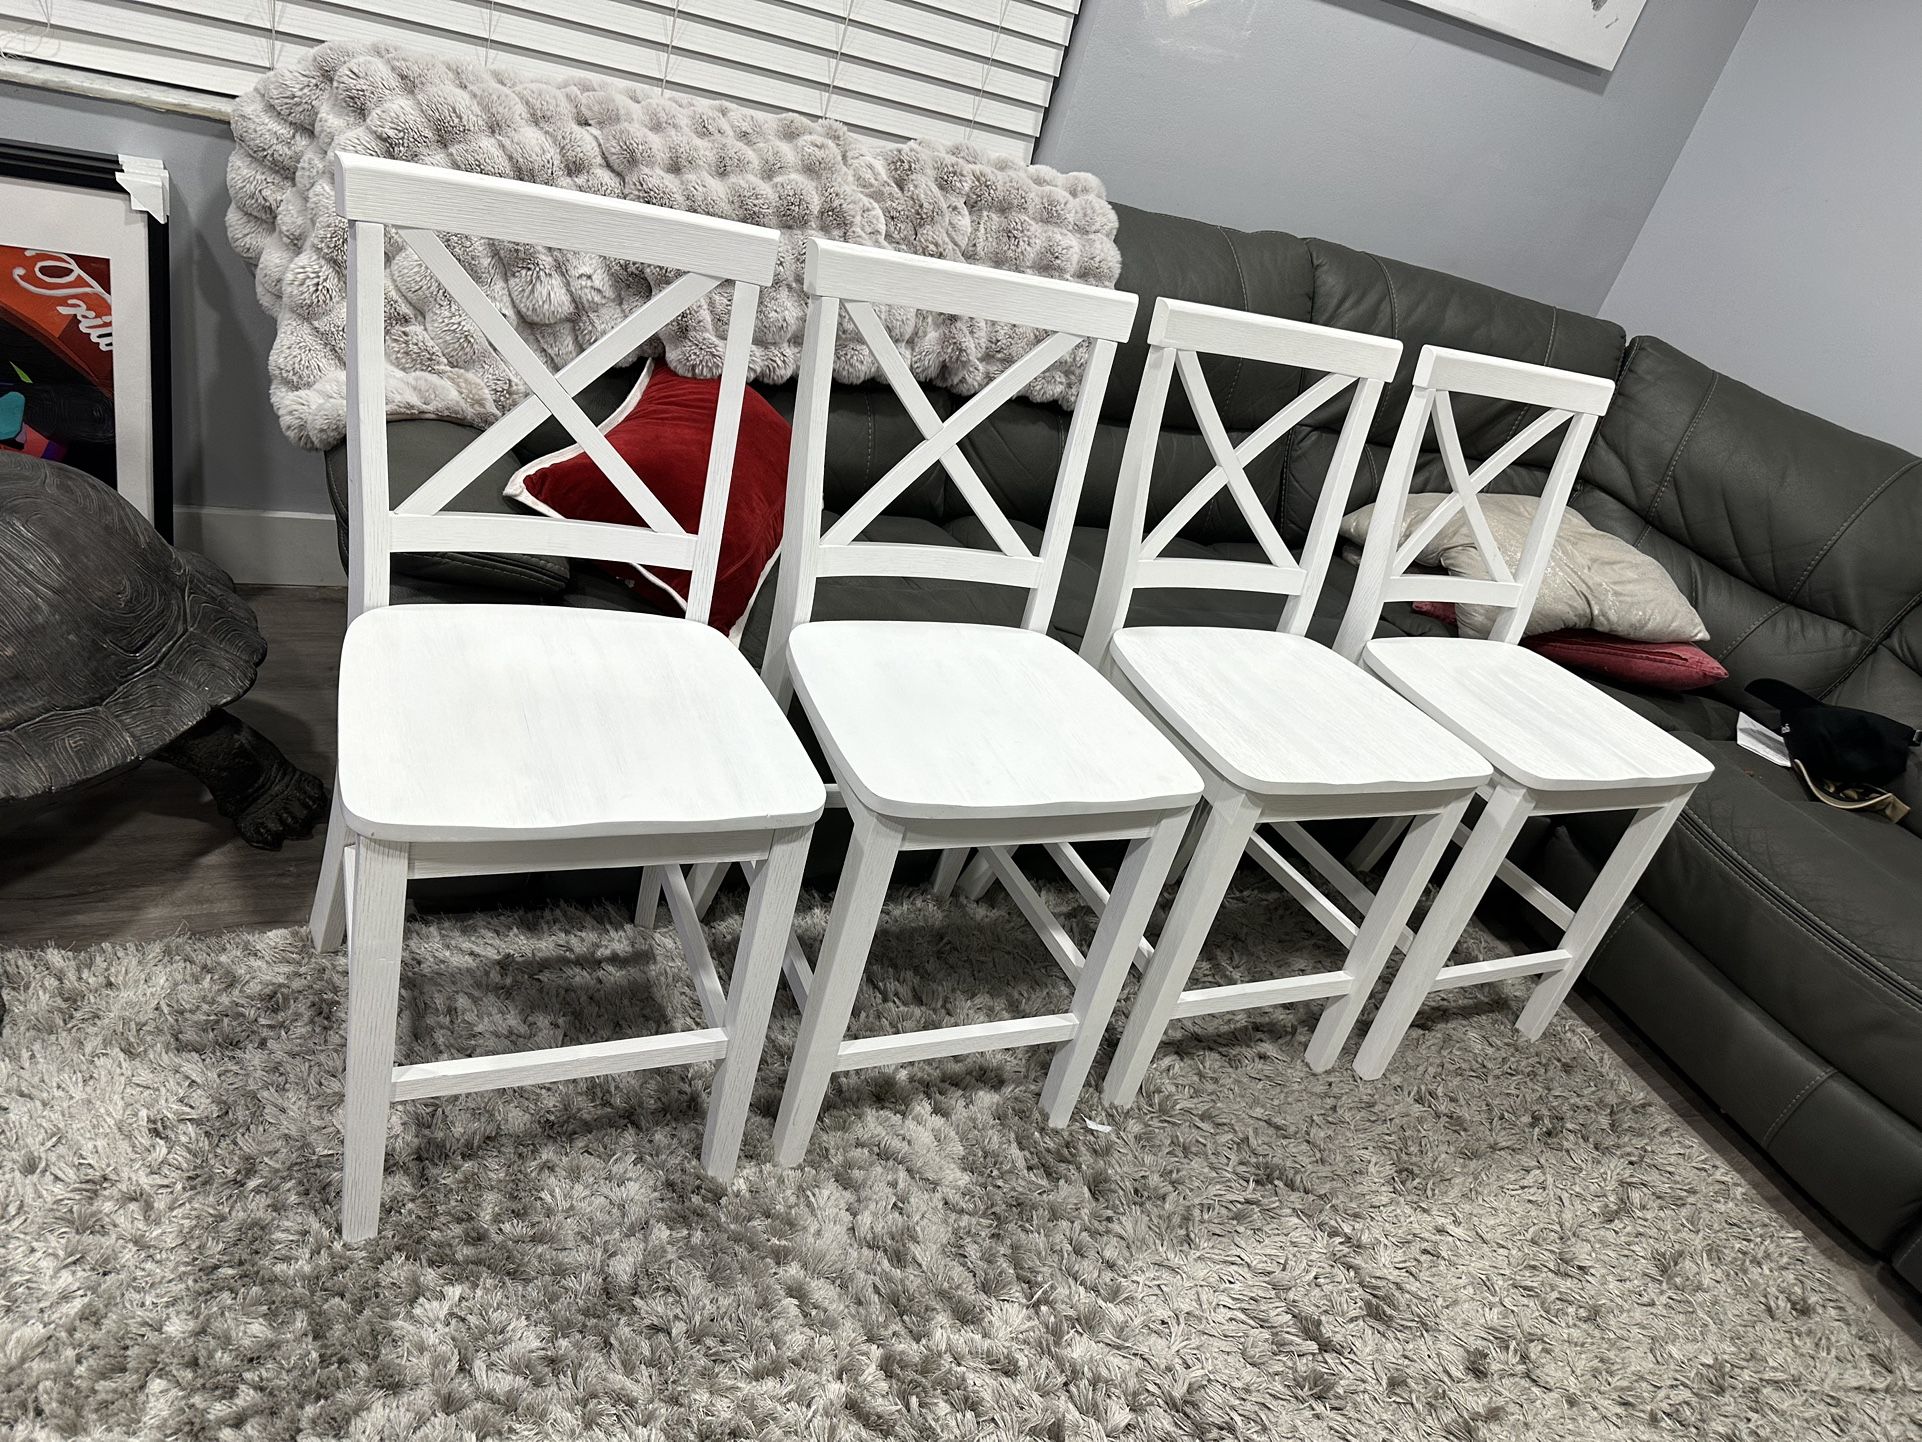 Table Chairs White Solid Wood New!! Retail $129 Each My Price All Four For $100